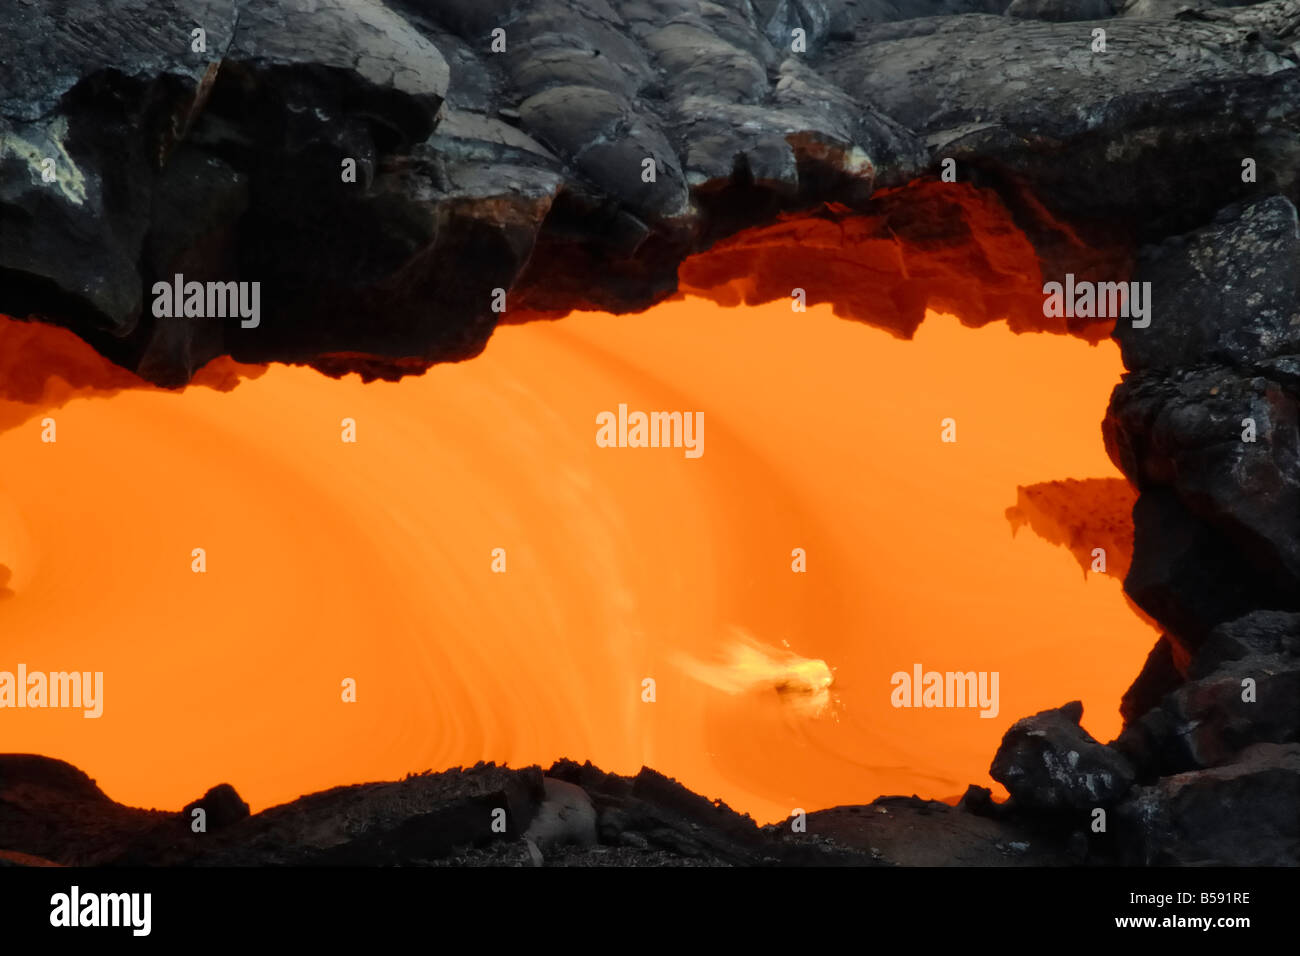 Skylight and flowing lava Waikupanaha ocean entry lava flow Stock Photo